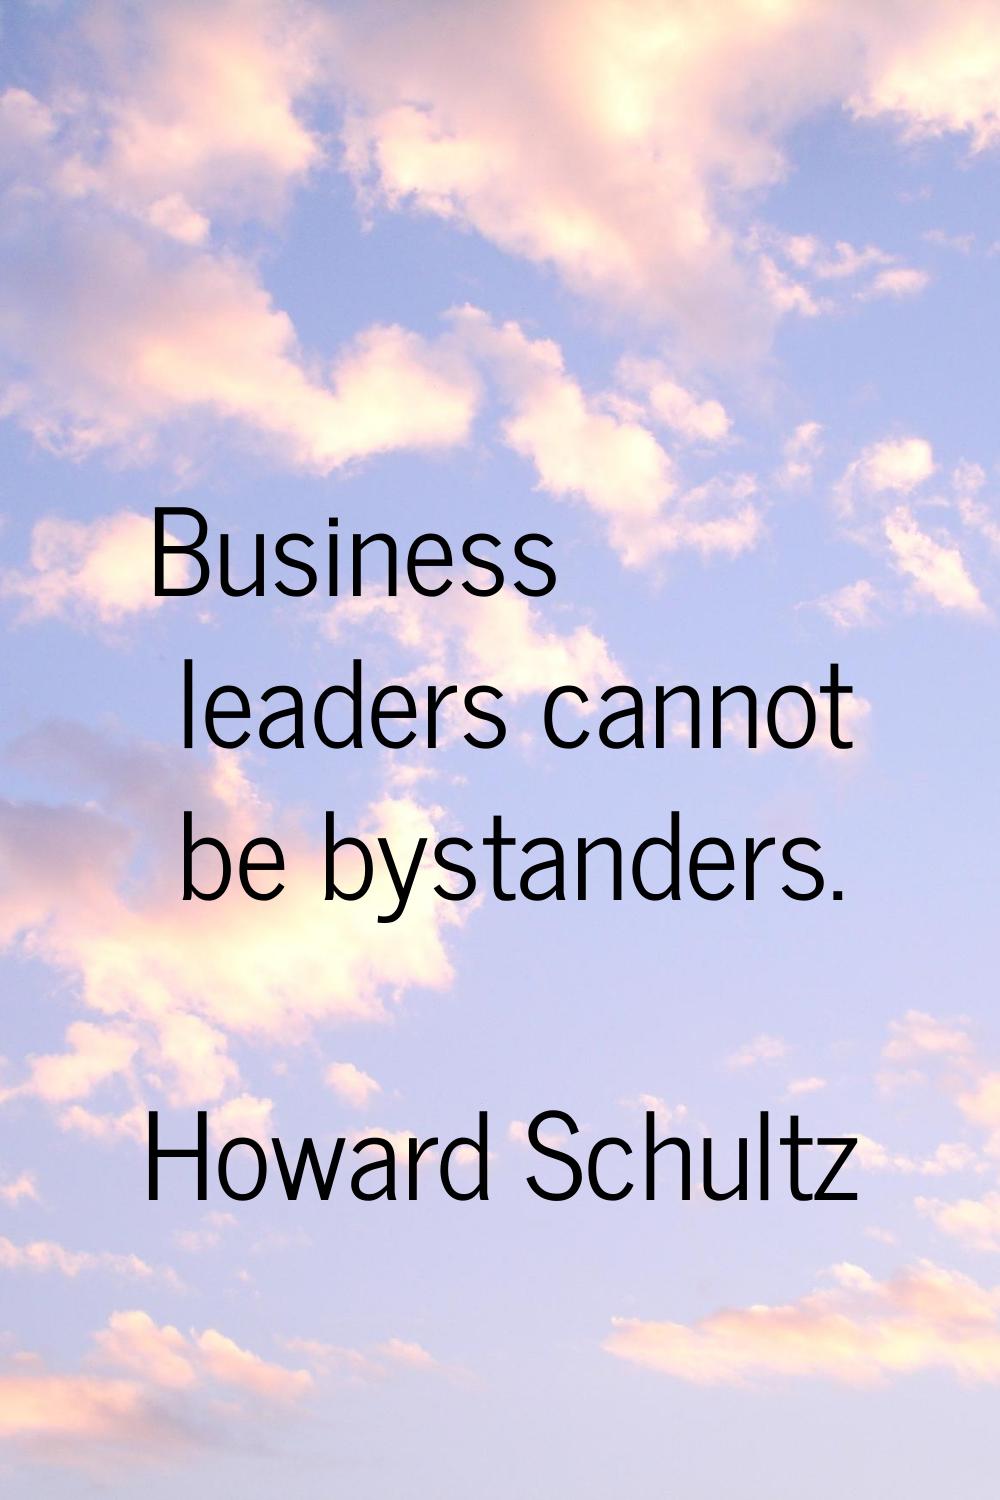 Business leaders cannot be bystanders.